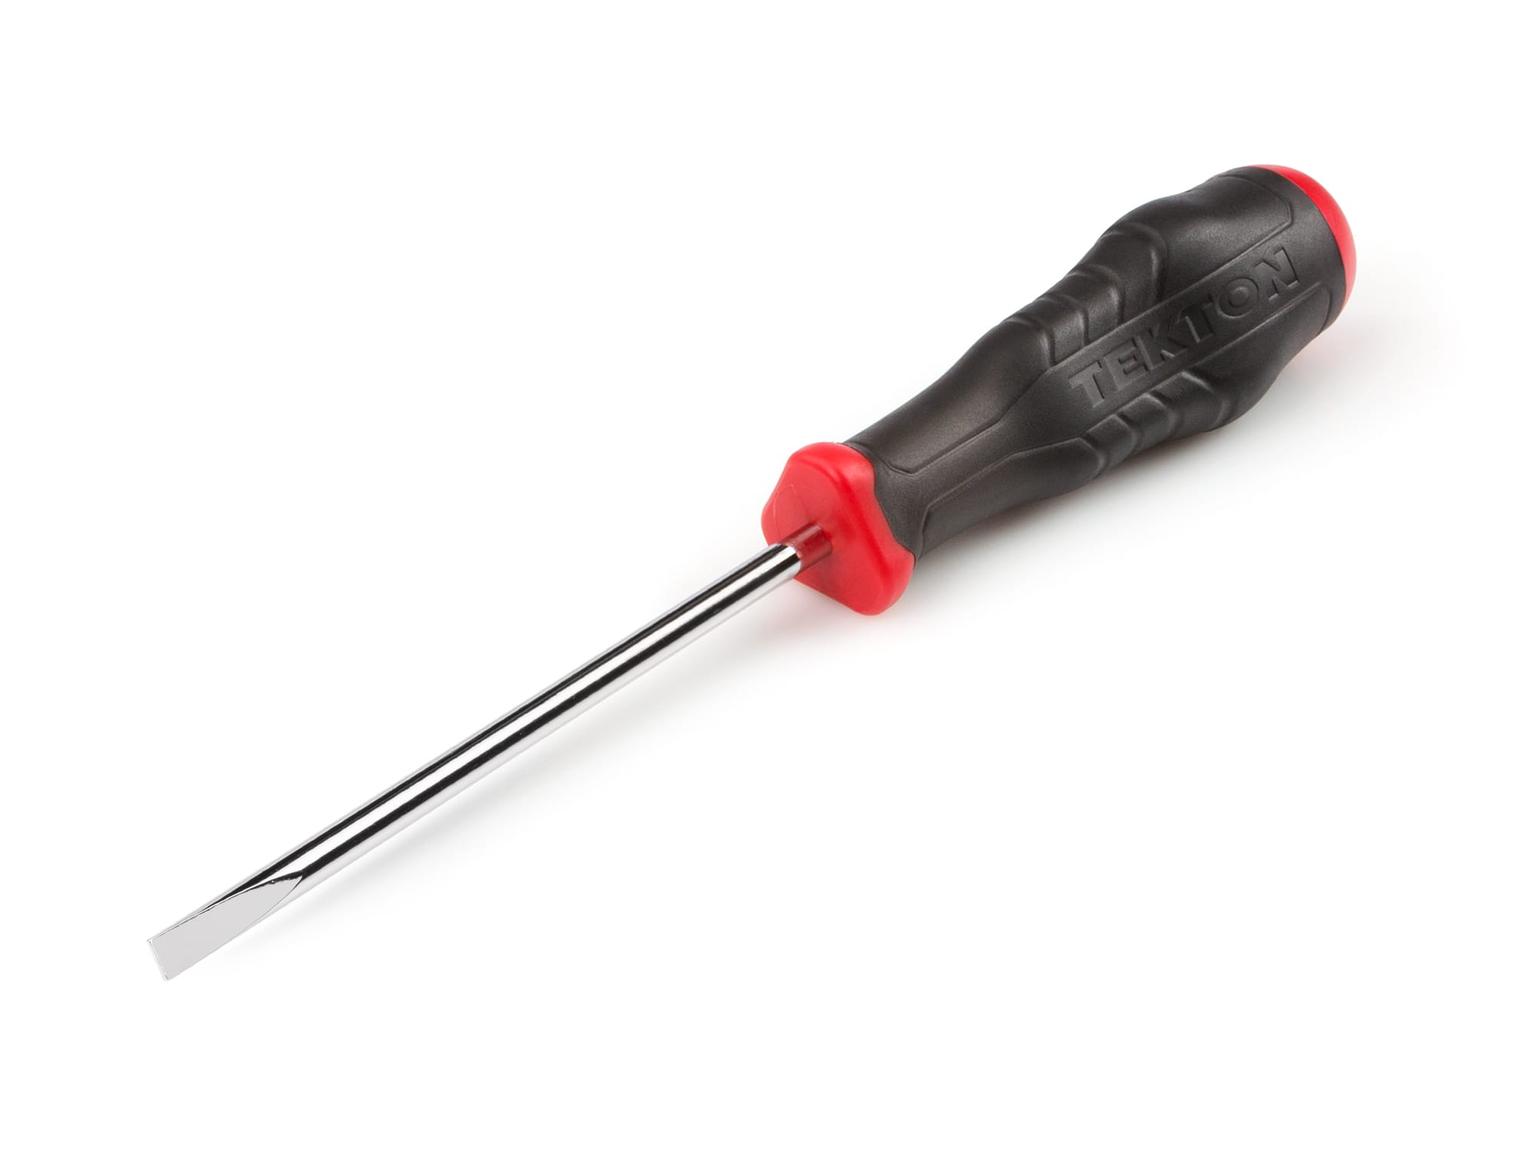 TEKTON DHE31188-T 3/16 Inch Slotted High-Torque Screwdriver